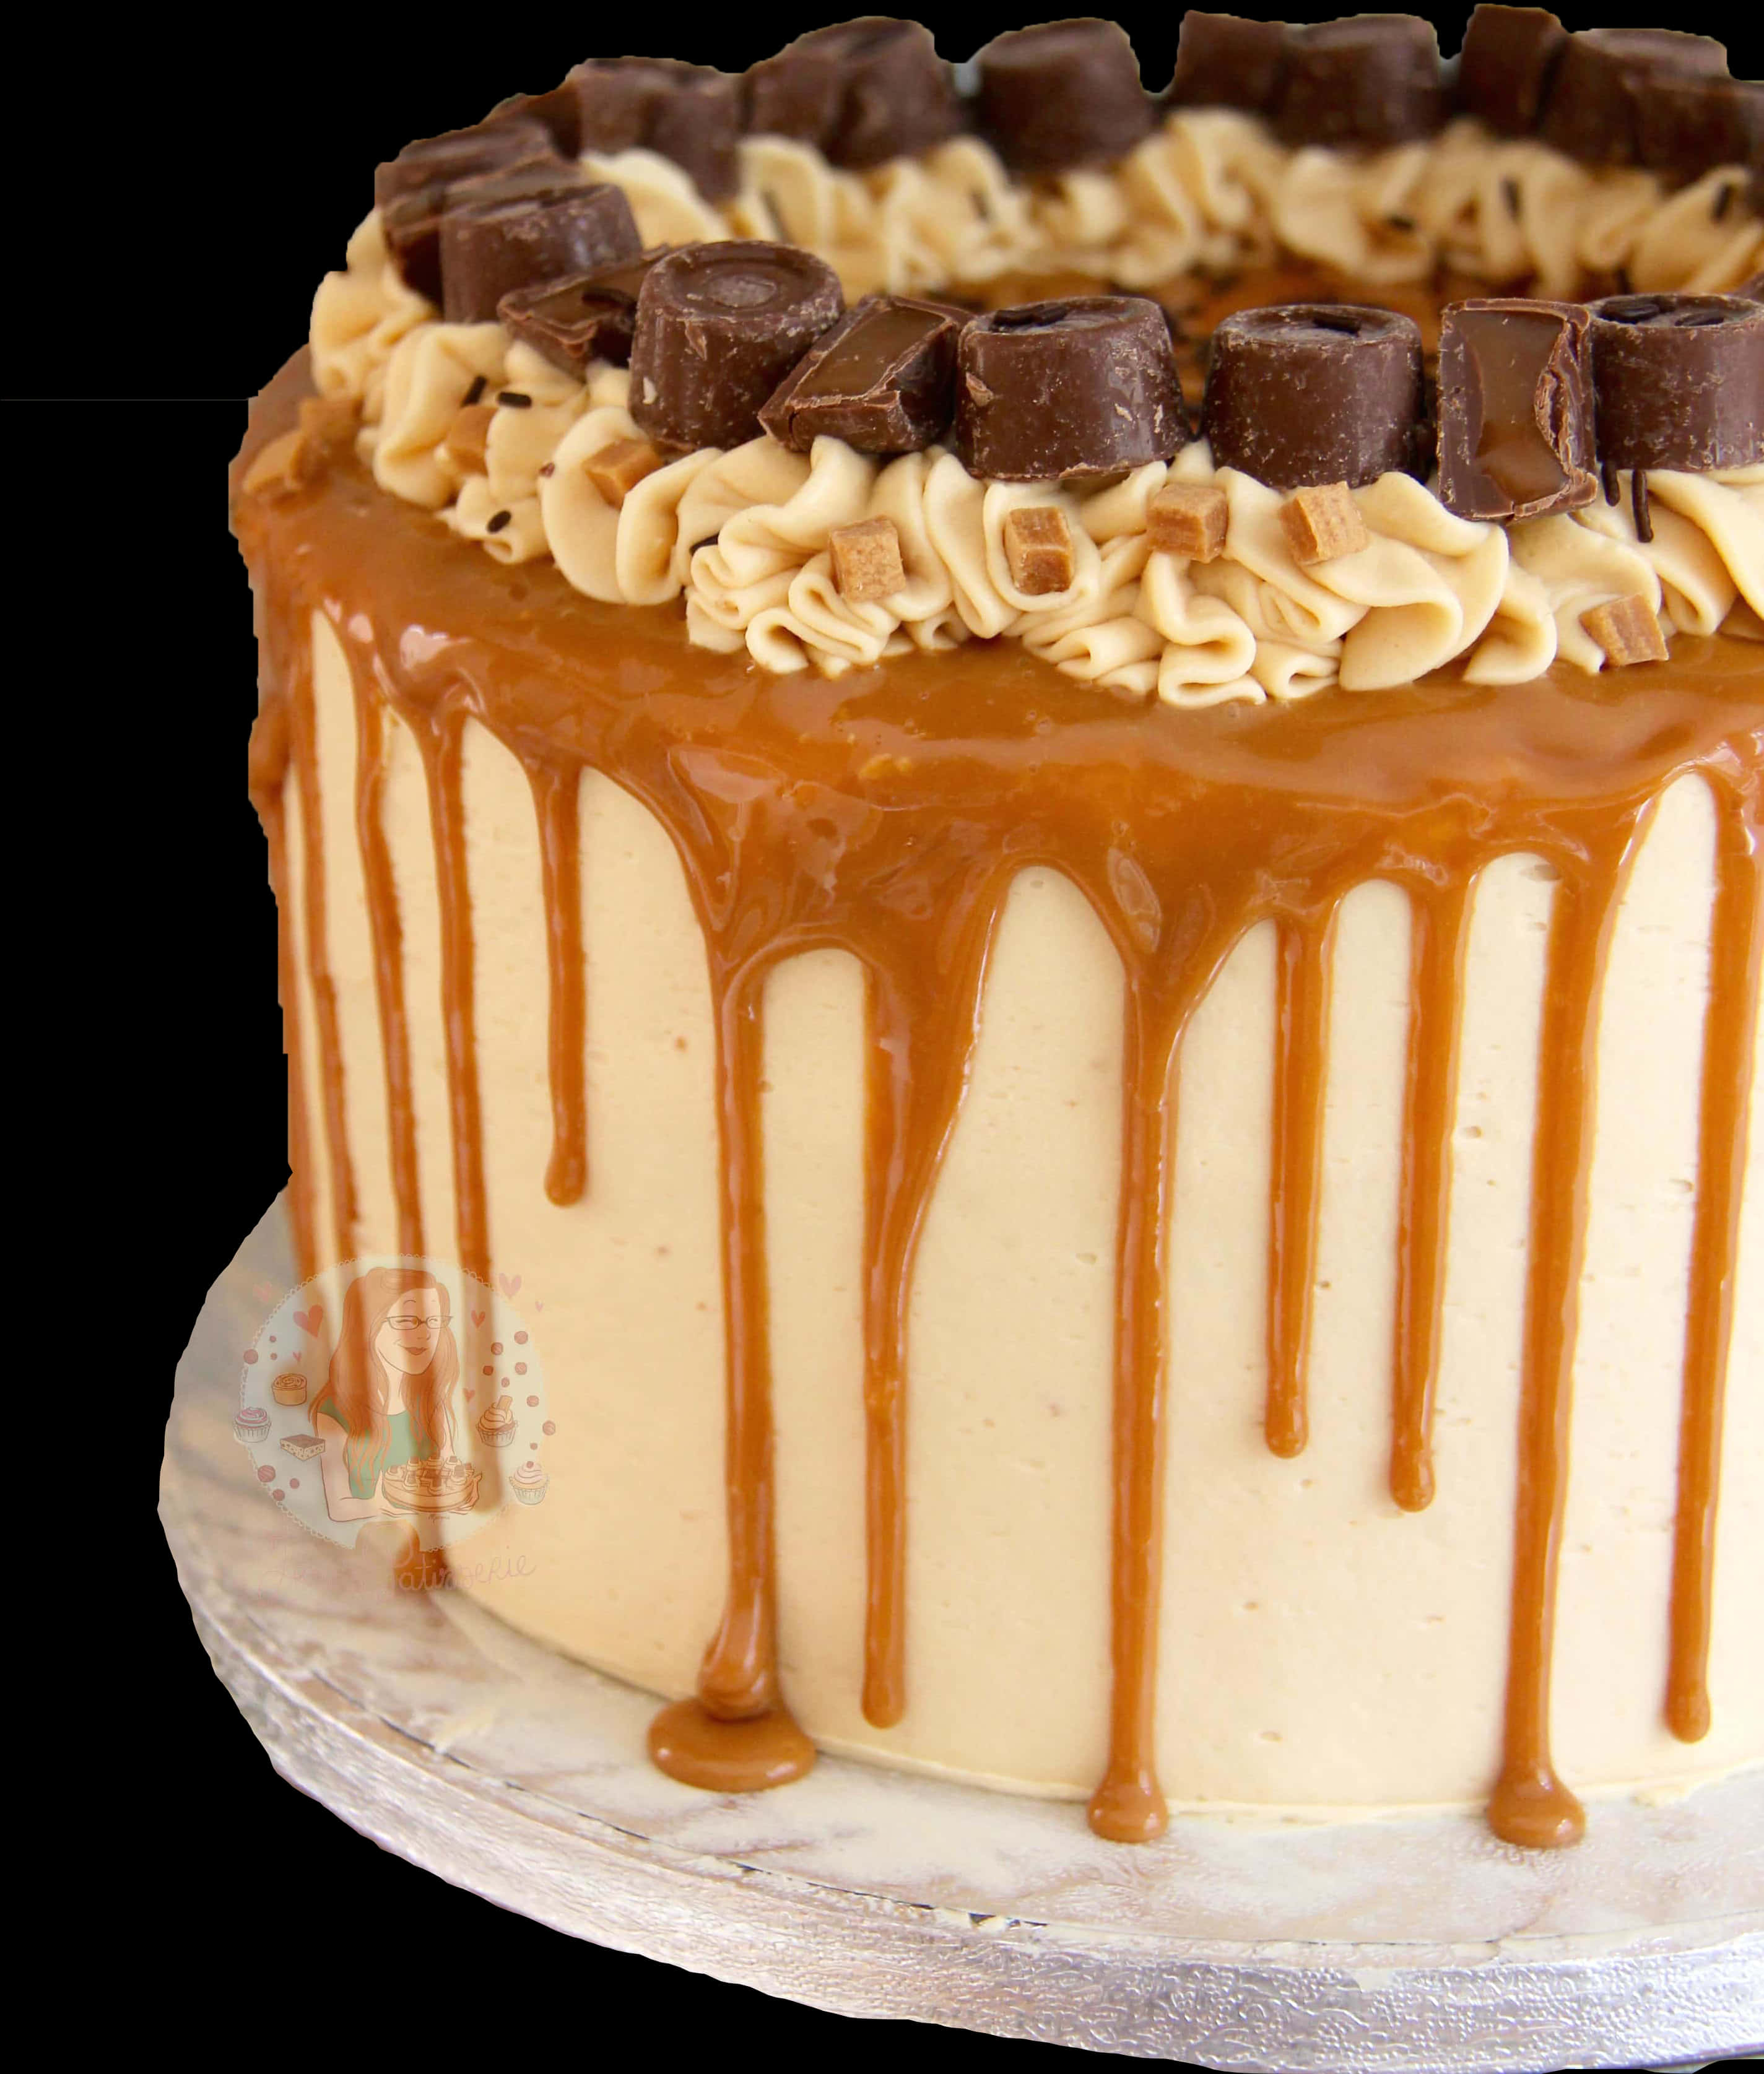 A Cake With Caramel Icing And Chocolate Candies